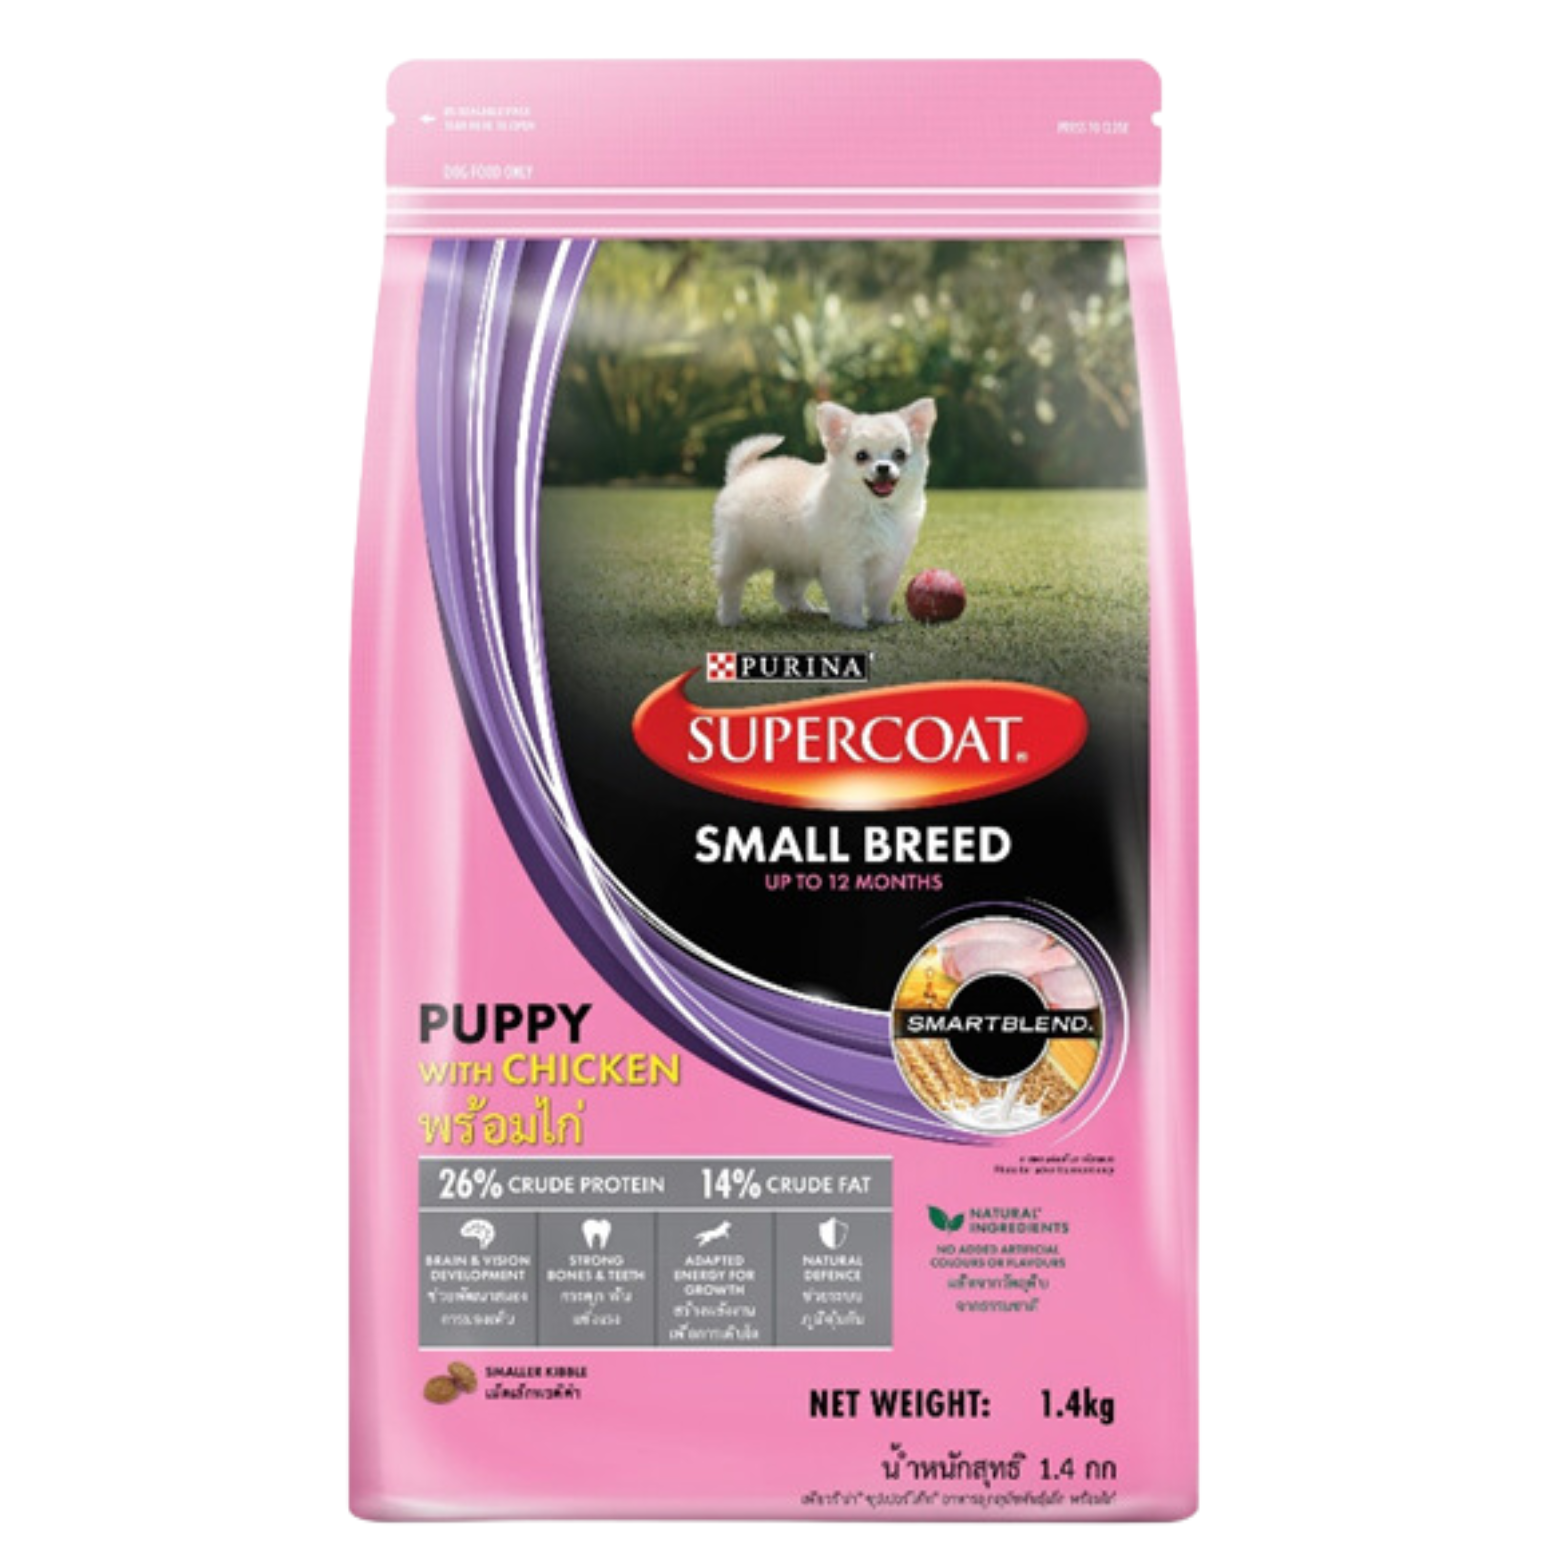 PURINA Supercoat Puppy (Small Breed) Chicken 1.4kg